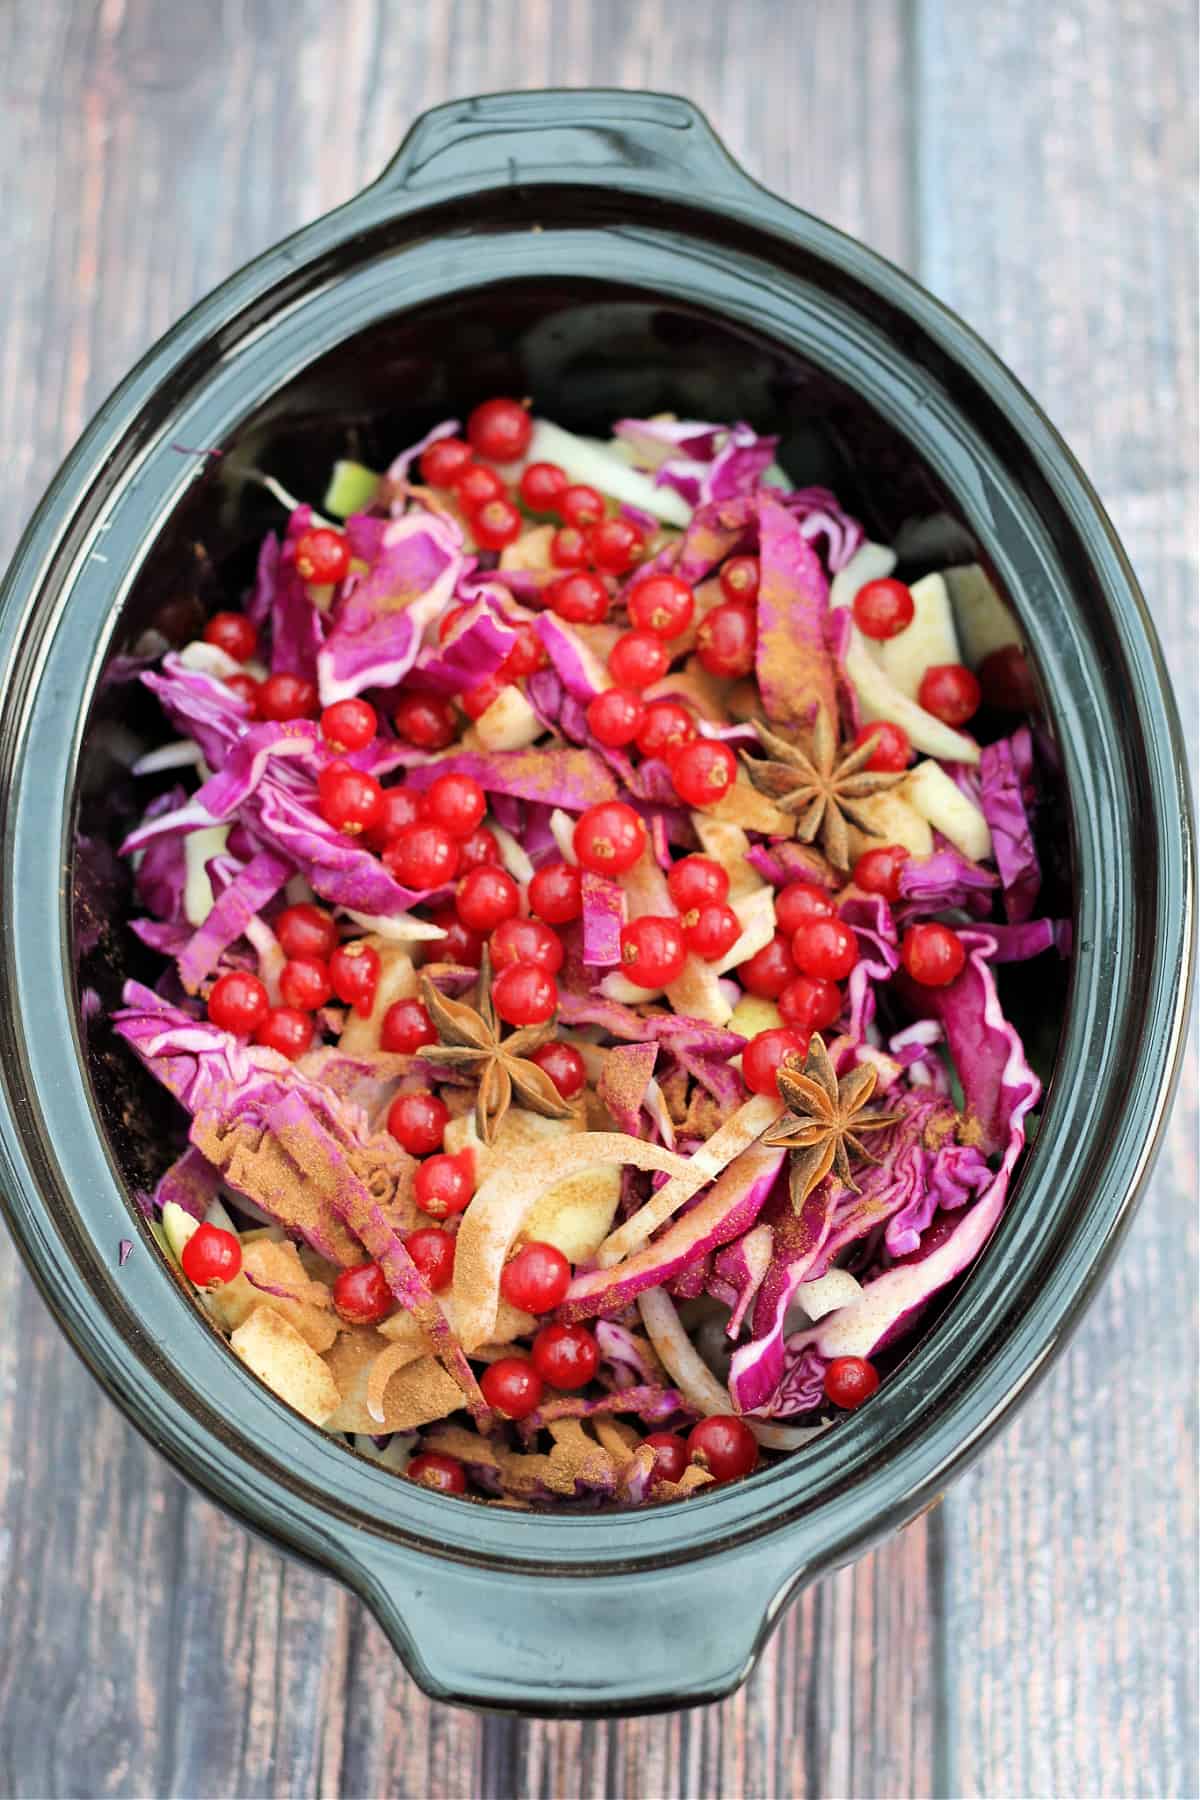 Red cabbage ingredients with star anise and redcurrants on top later, in slow cooker pot.